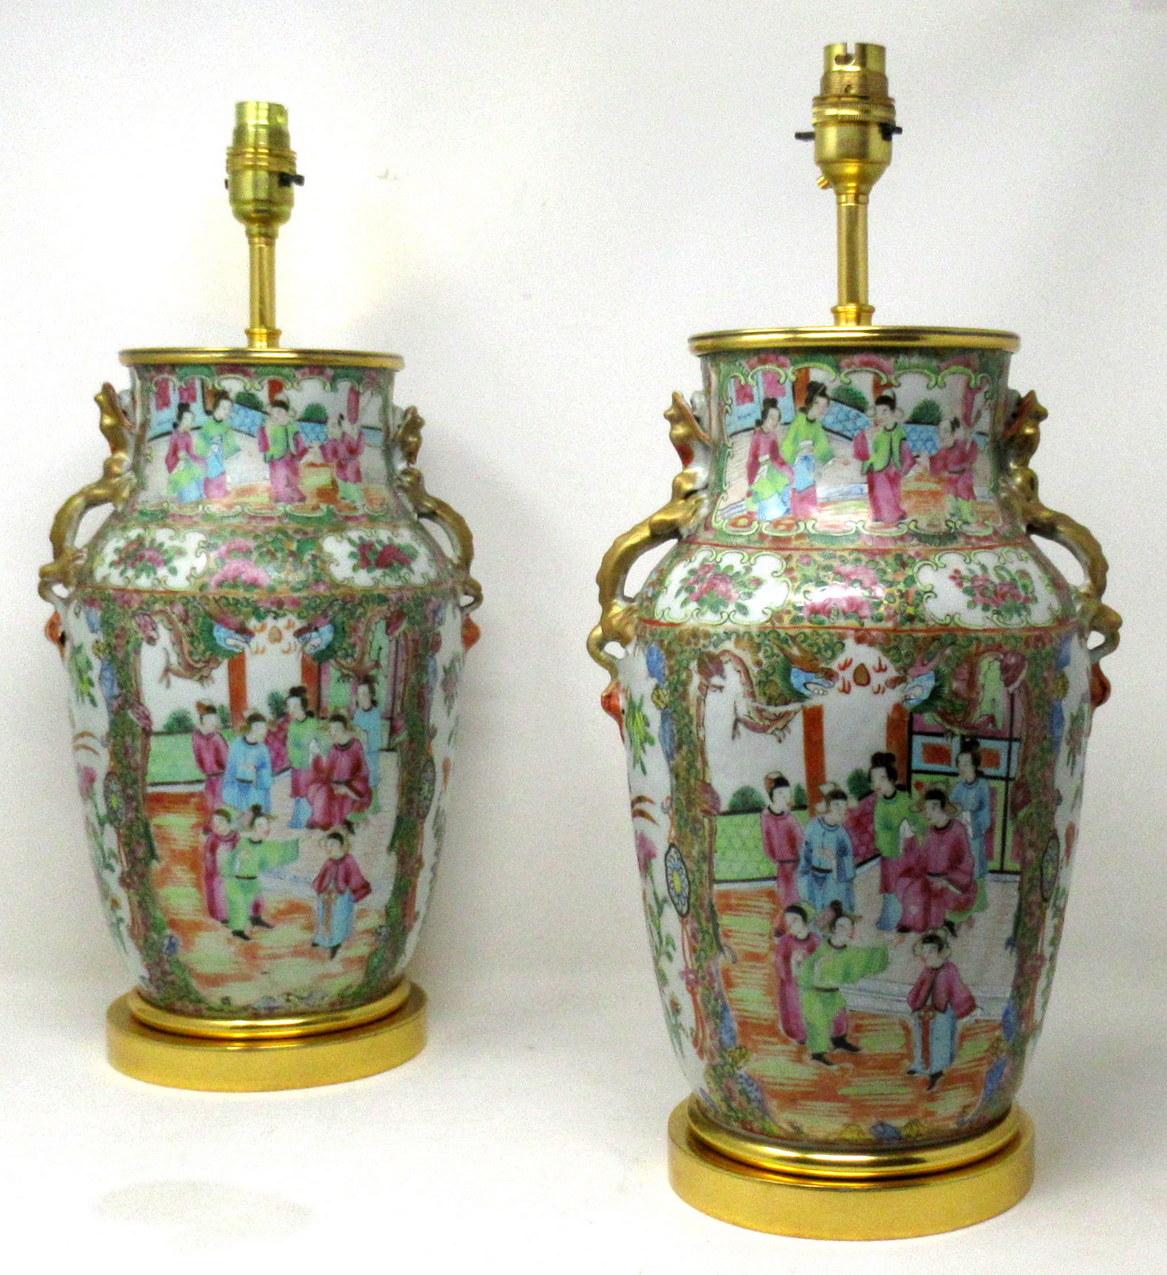 An Exceptionally Fine Pair of Chinese Cantonese Hand Decorated Porcelain Oil Lamps with ornate Ormolu bases now converted to Electric Table Lamps, of good size proportions, (see last image in situ) mid Nineteenth Century. 

The main outer bodies of